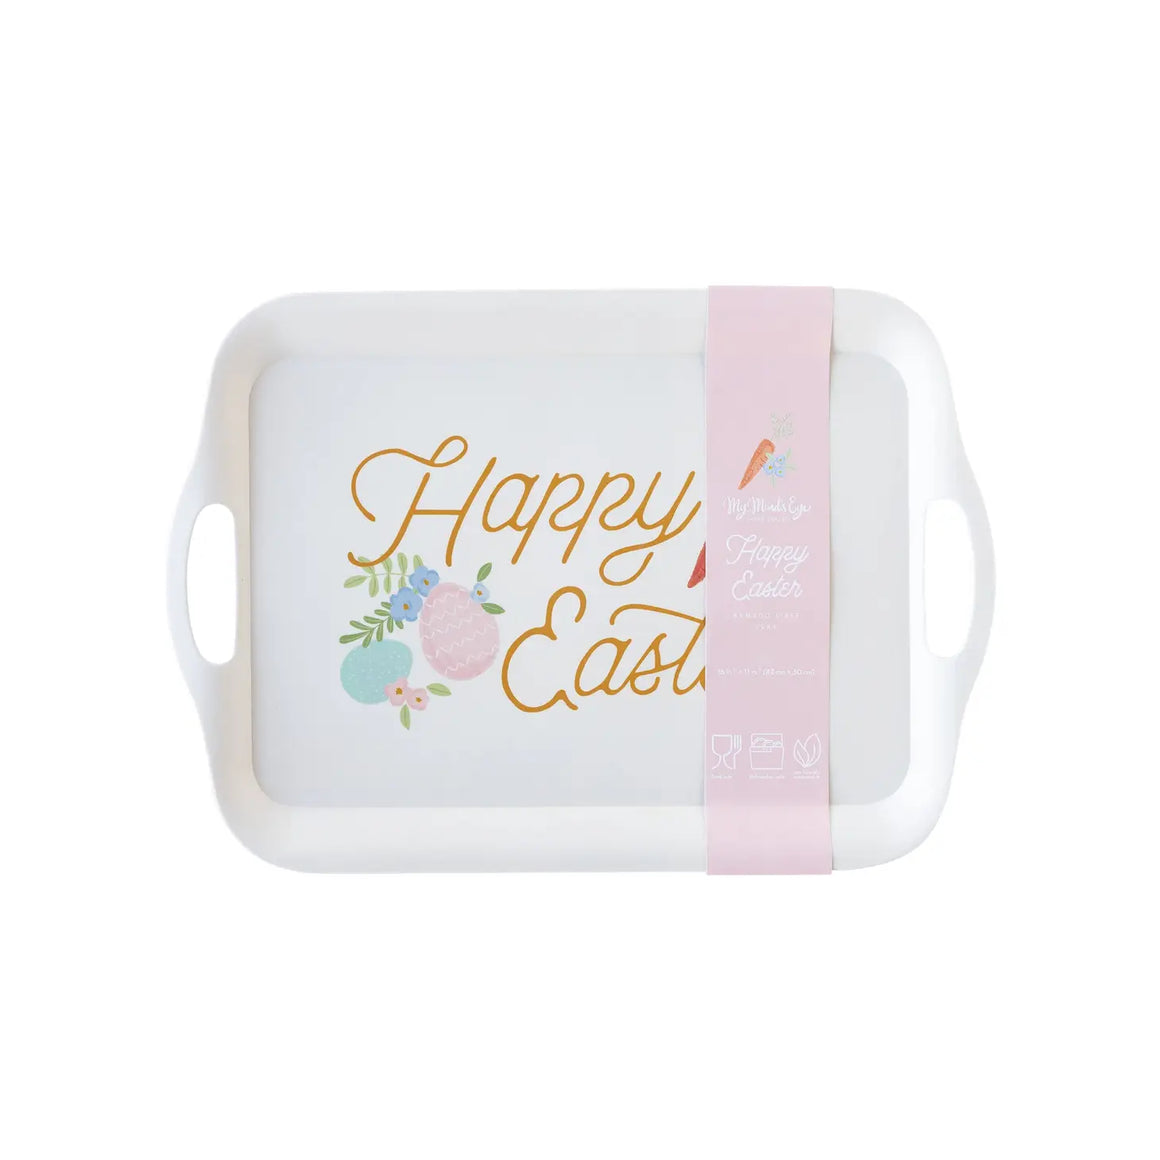 SERVING TRAY - HAPPY EASTER BAMBOO TRAY